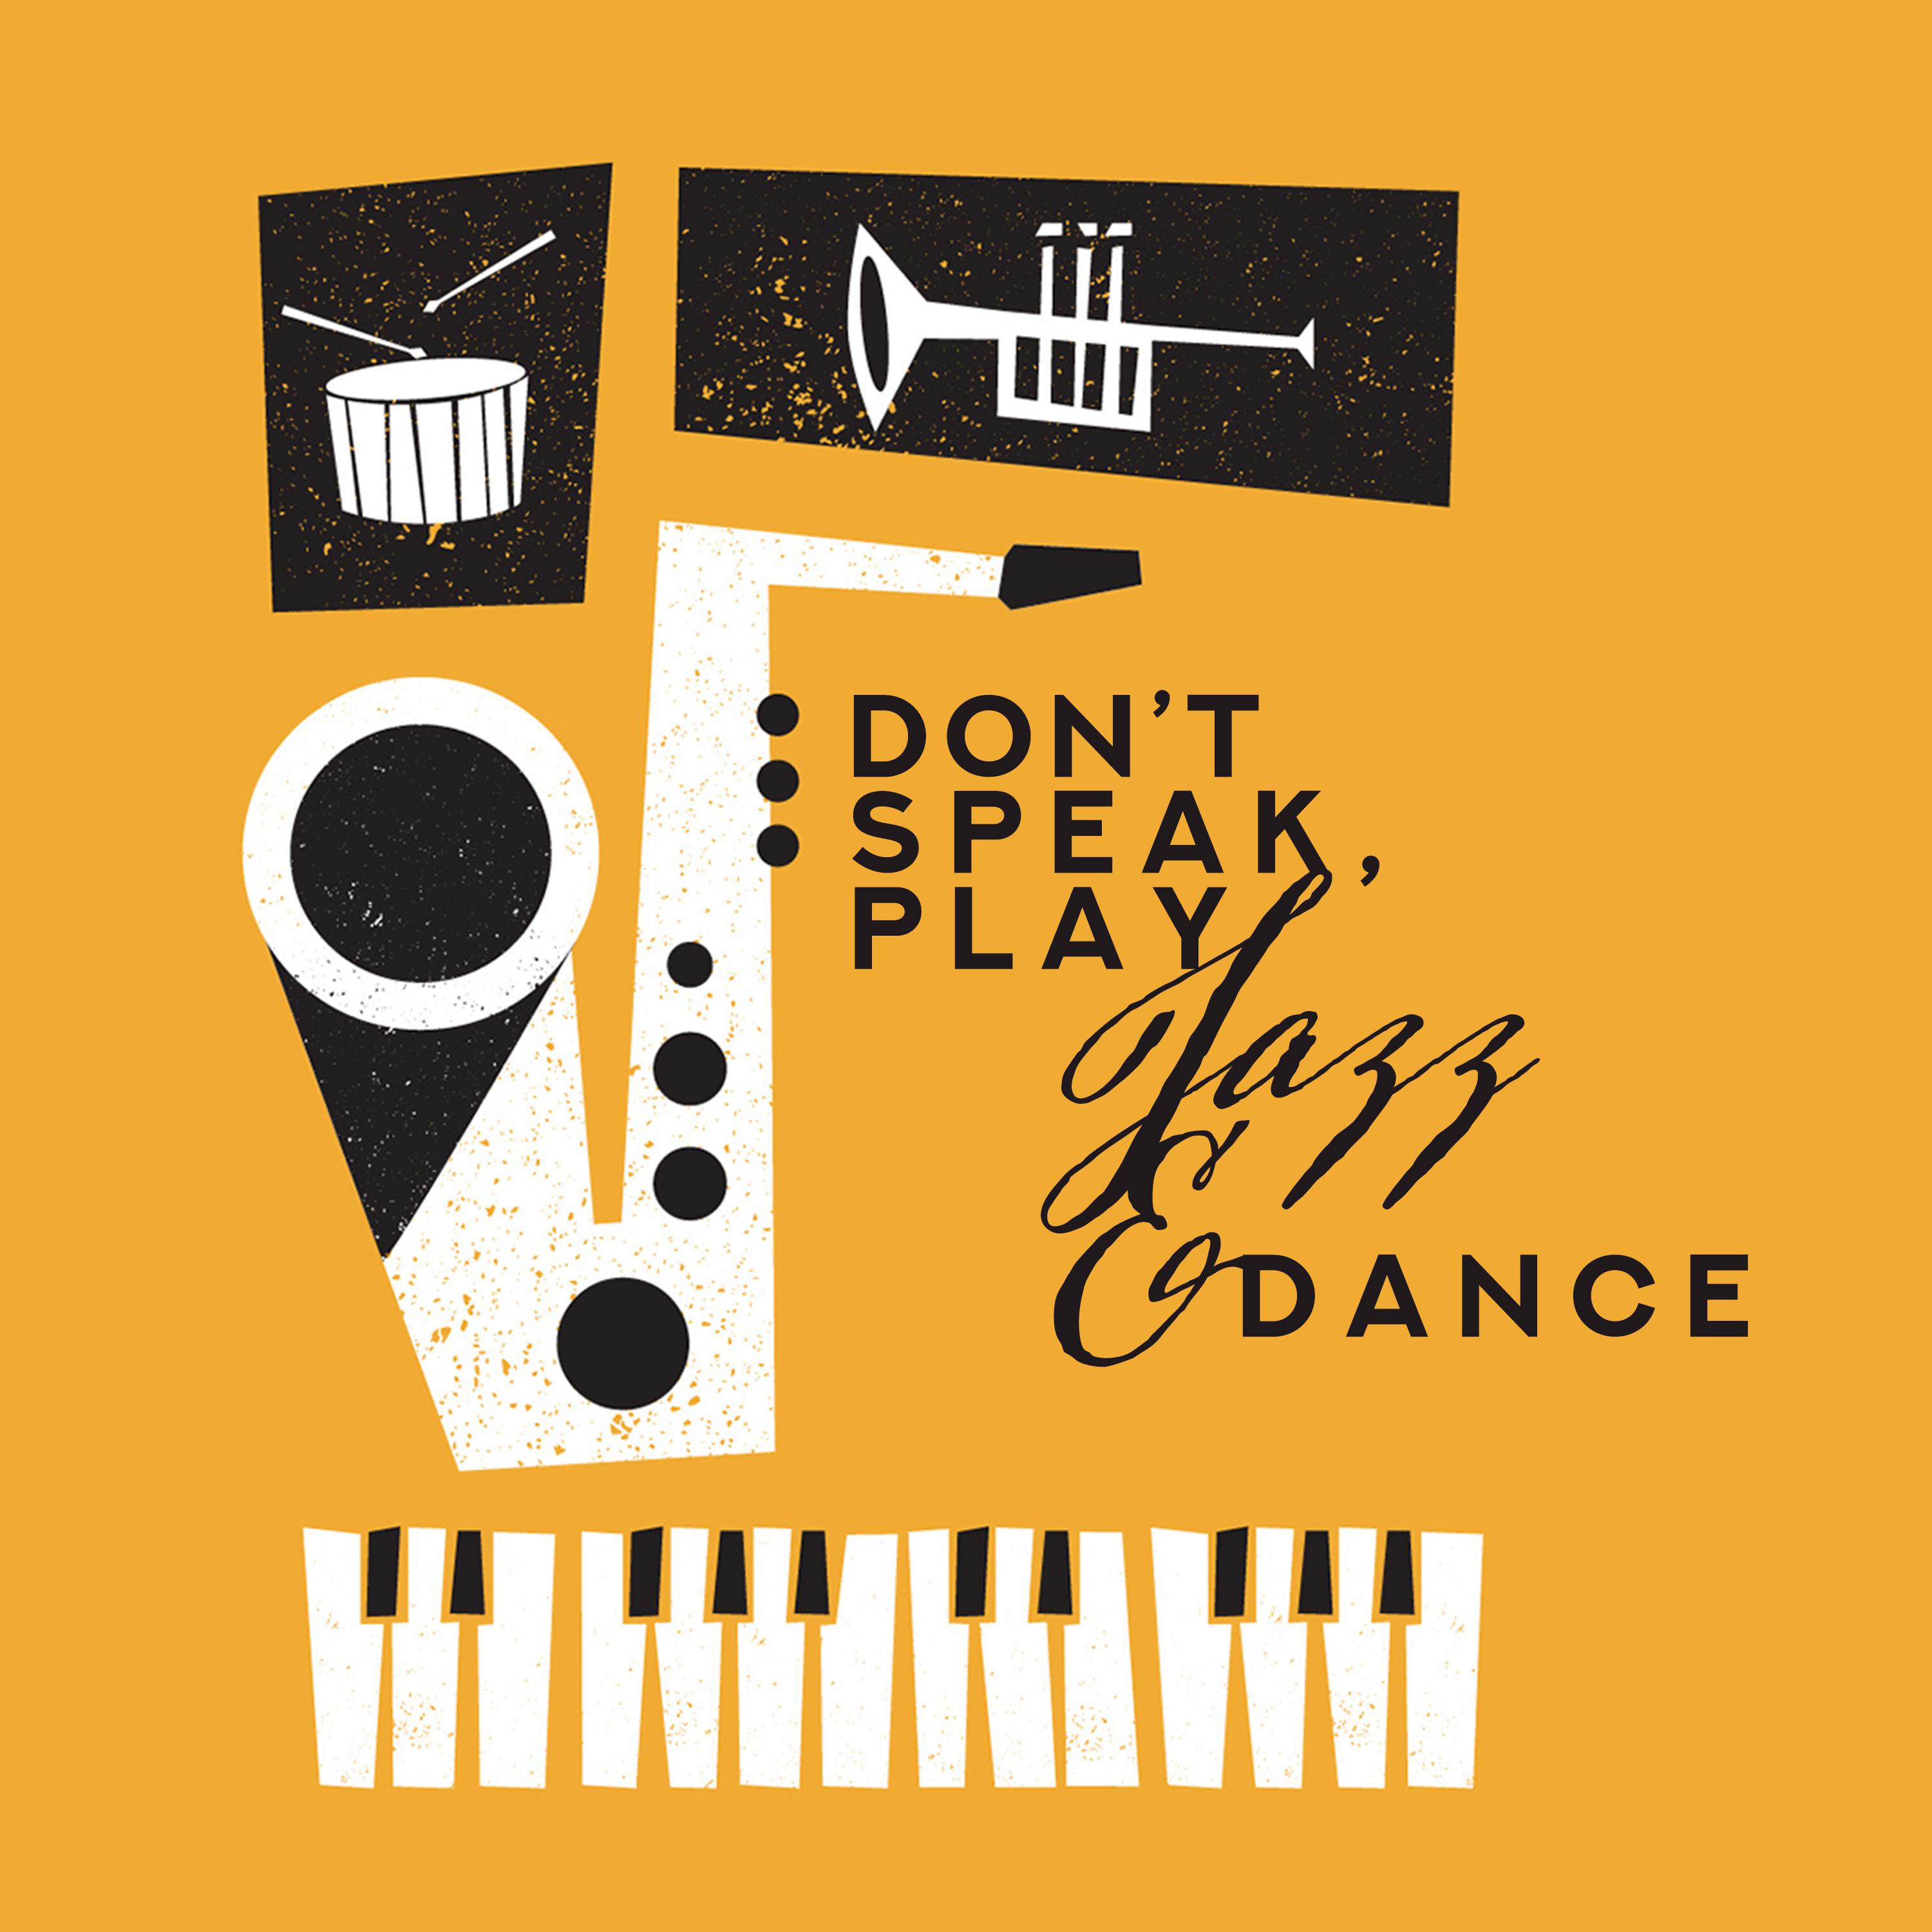 Don' t Speak, Play Jazz  Dance  2019 Instrumental Smooth Jazz Compilation Perfect for Vintage Styled Dance Party, Happy Melodies with Oldschool Sounds of Piano, Contrabass, Sax  Many More